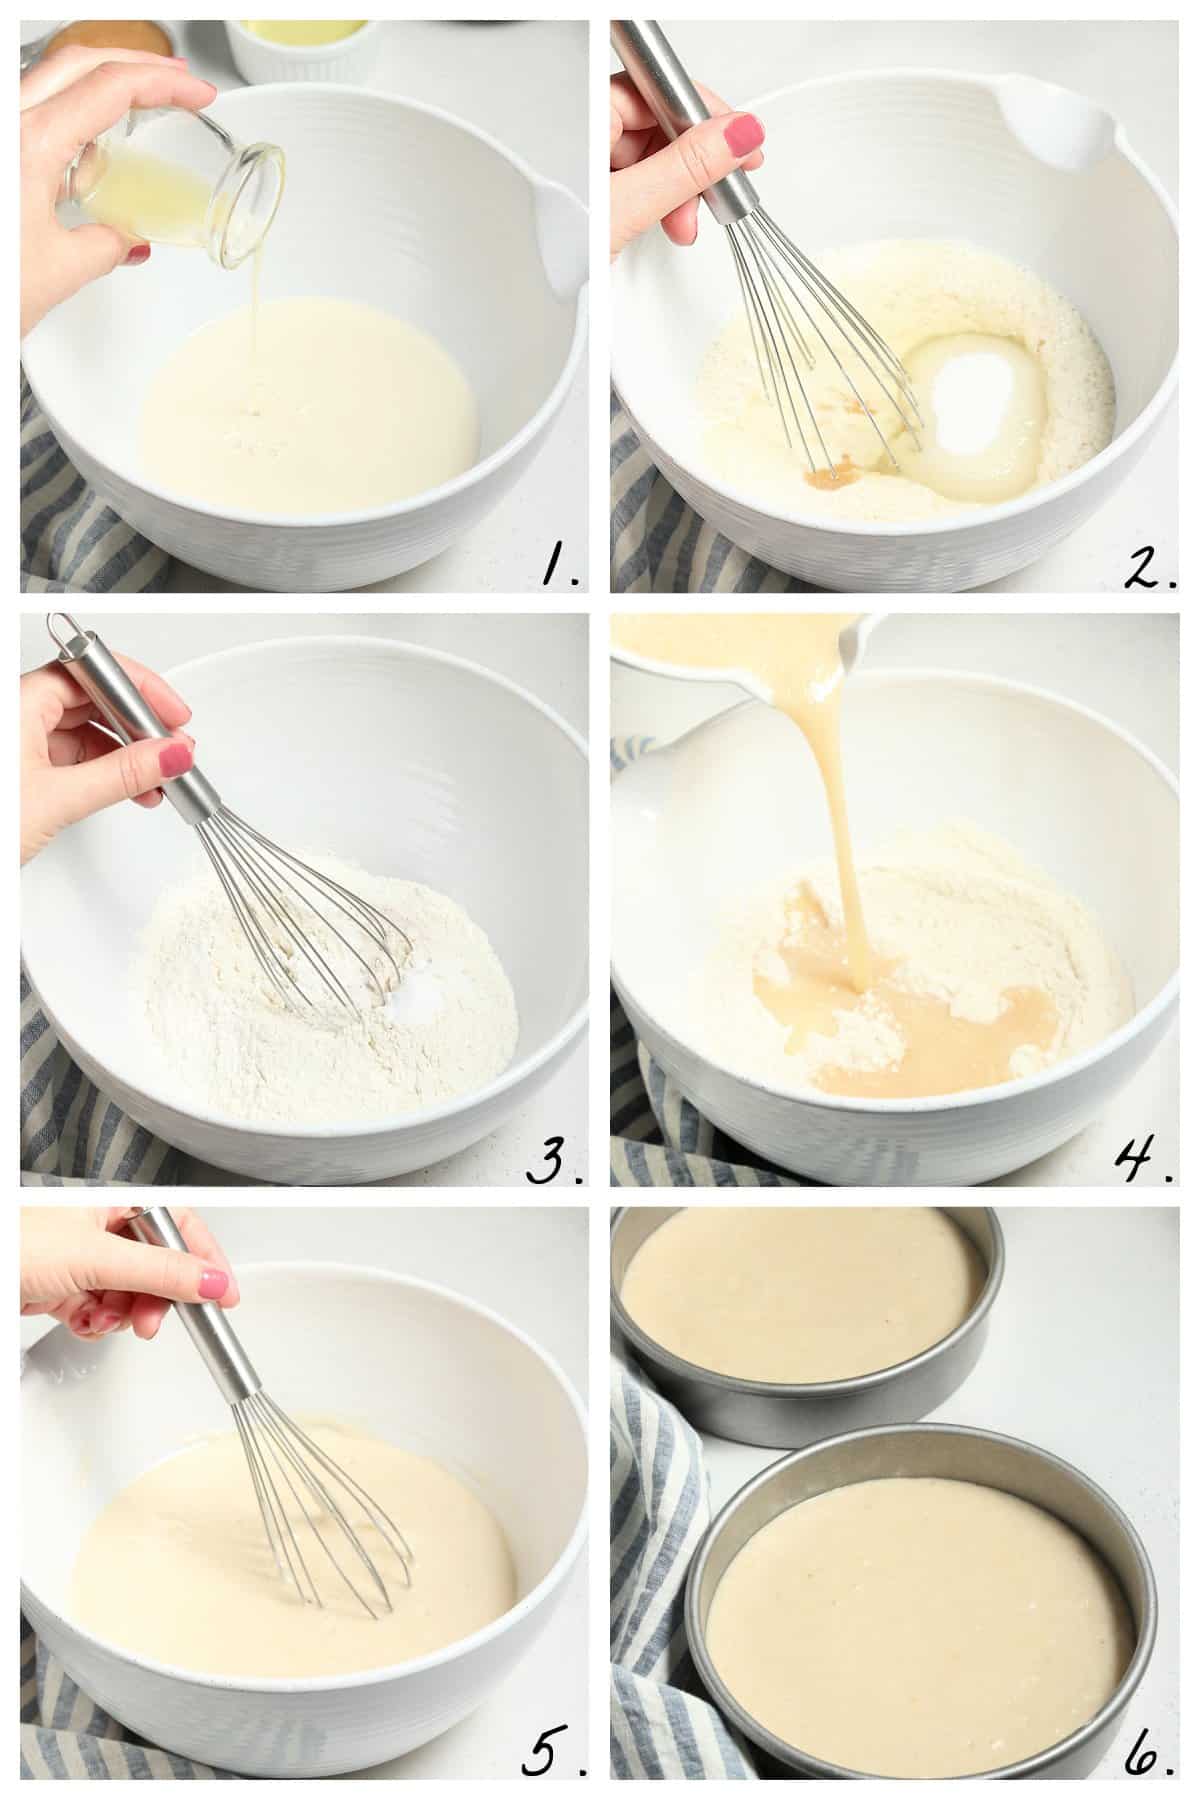 six process photos of mixing cake batter in a mixing bowl.